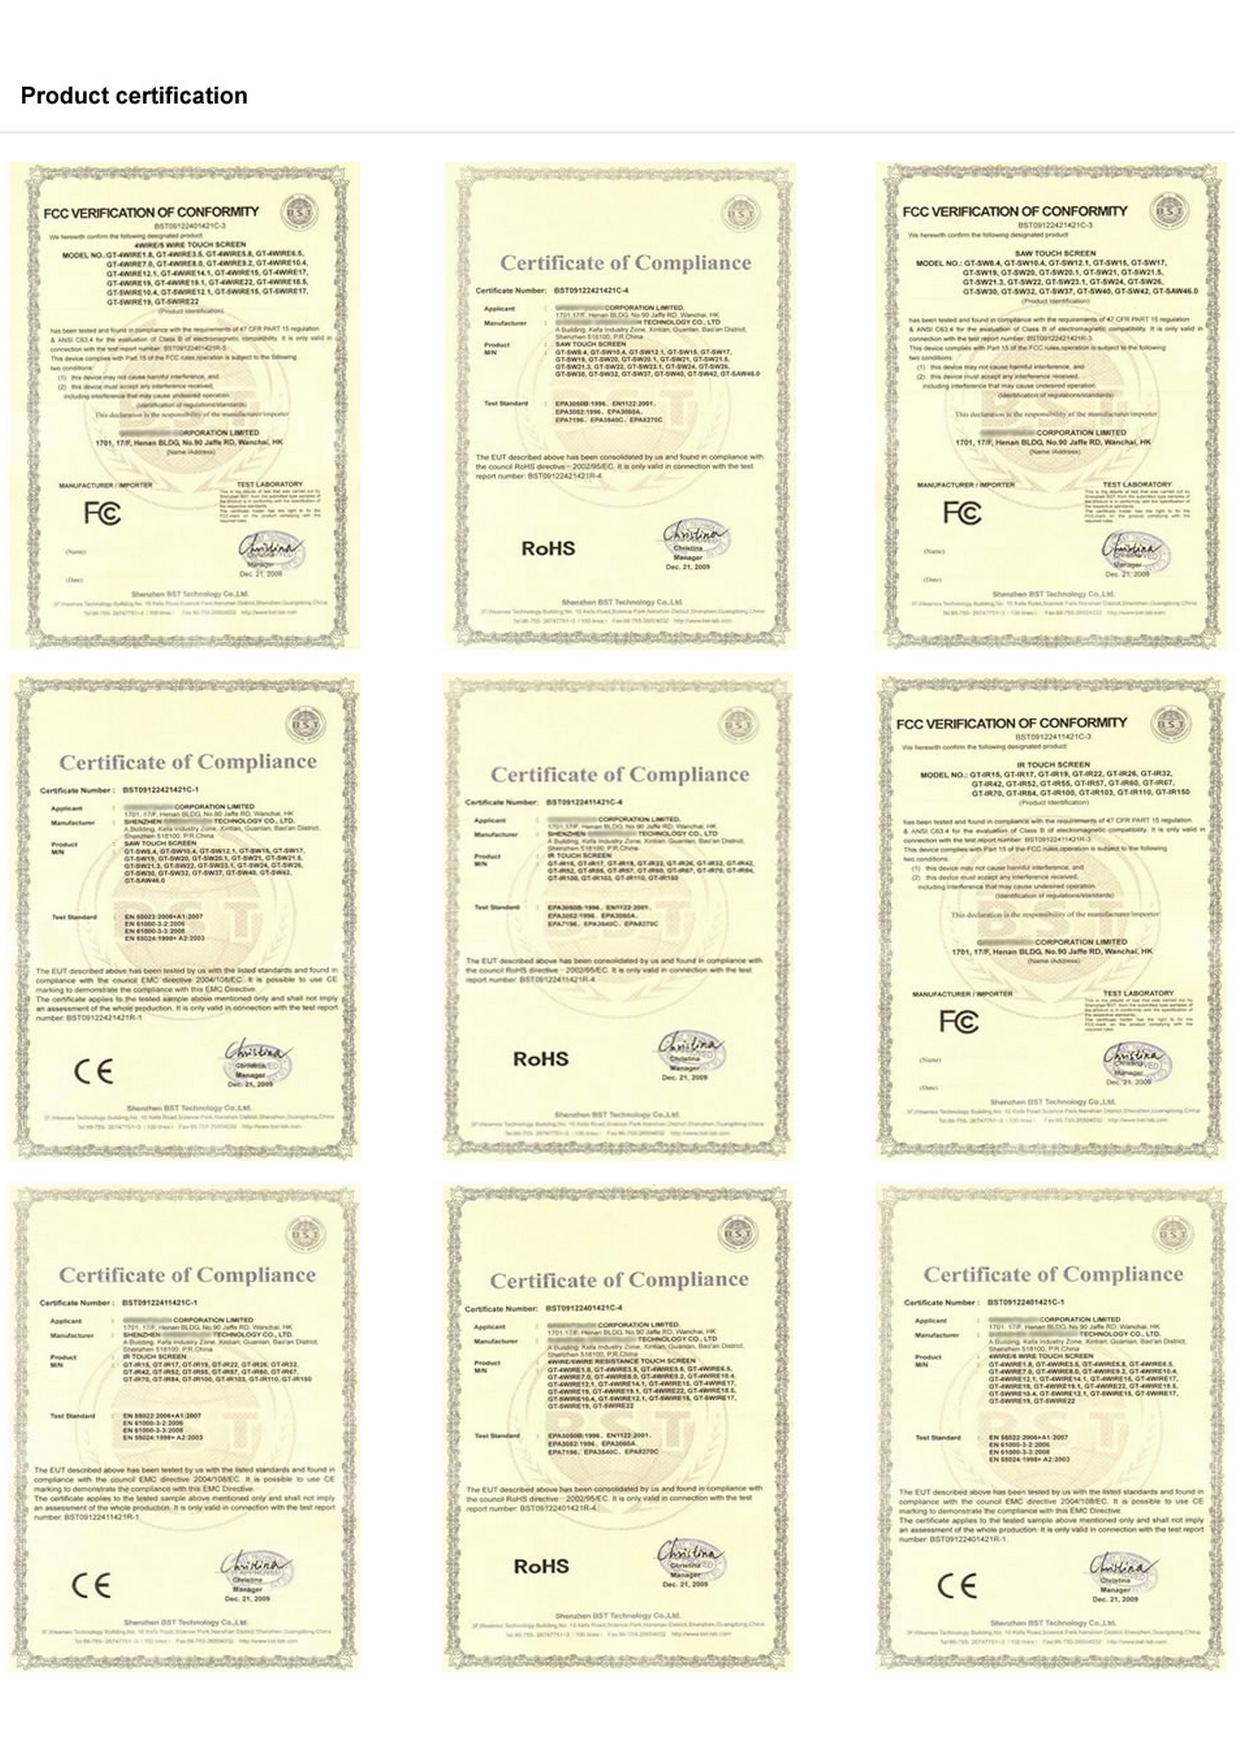 Product certifiication